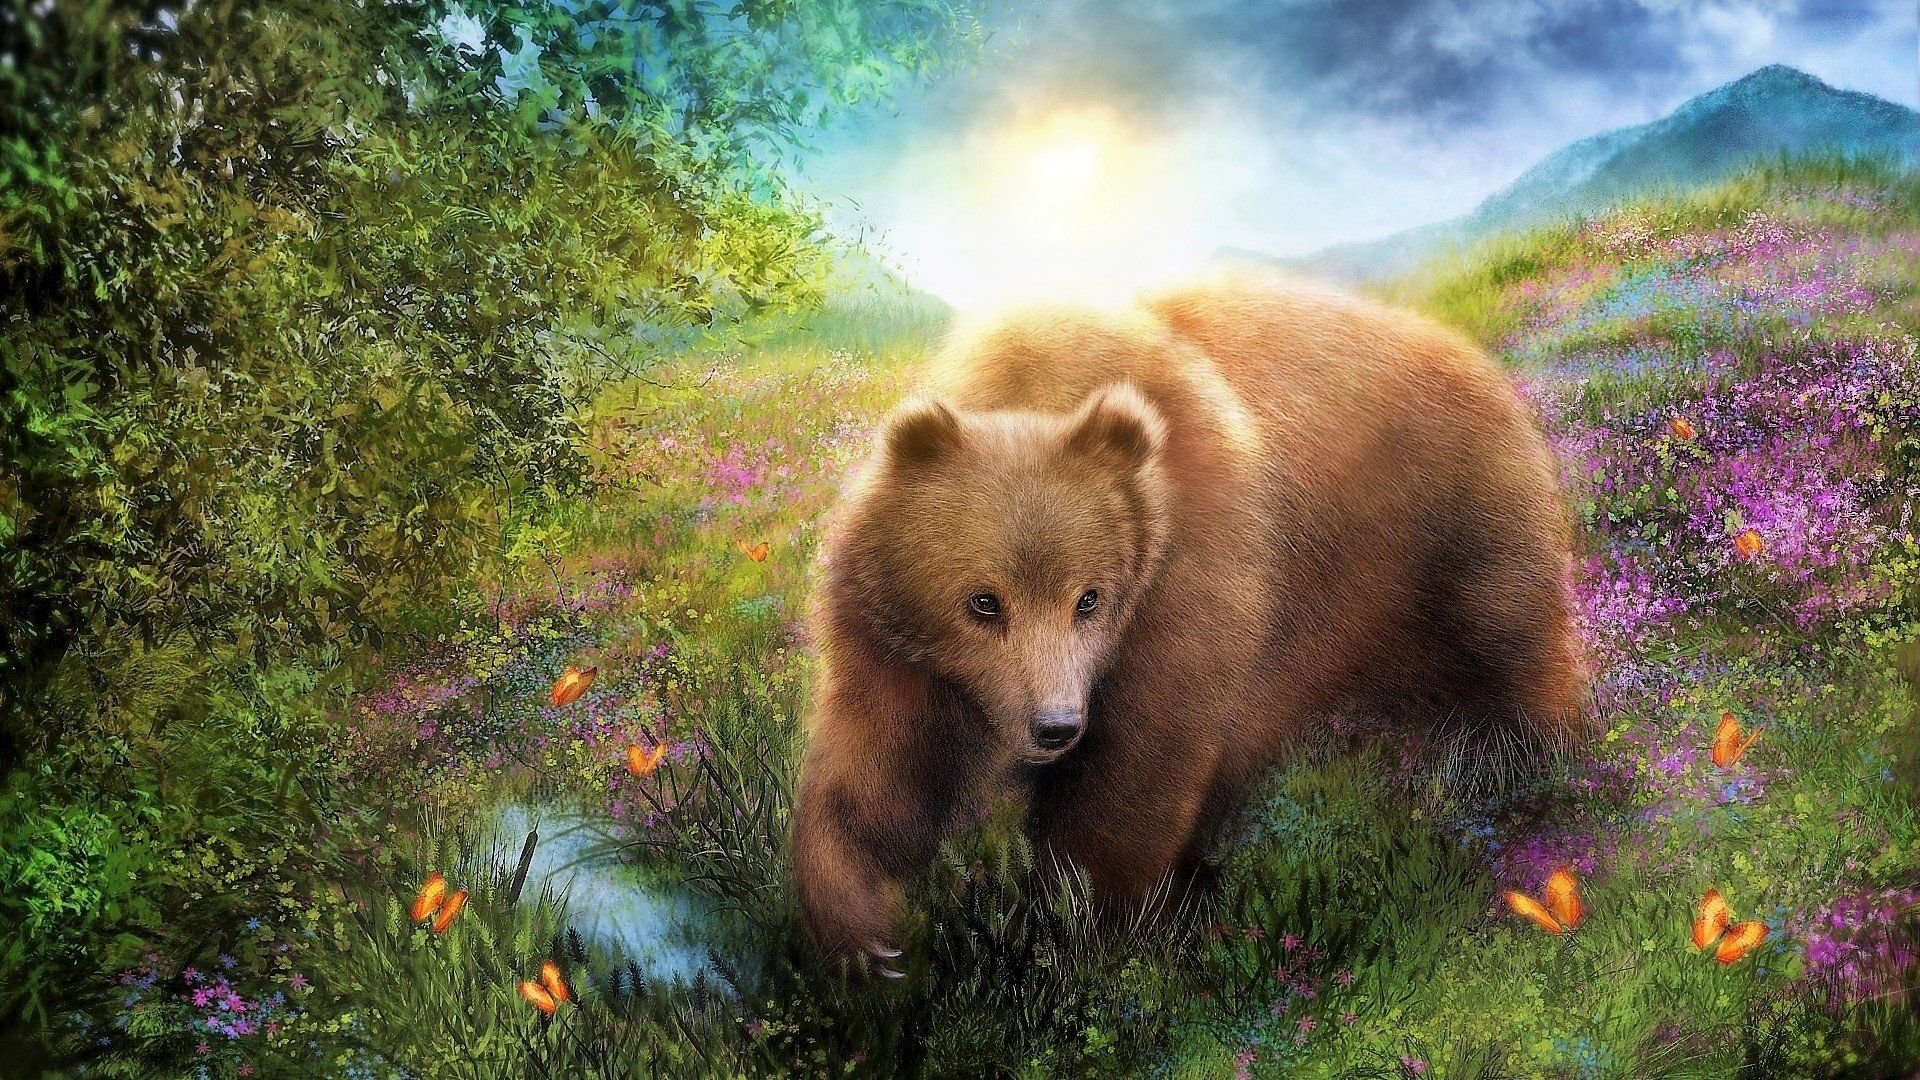 Painting of a Bear in Spring Field HD Wallpaper. Background Image